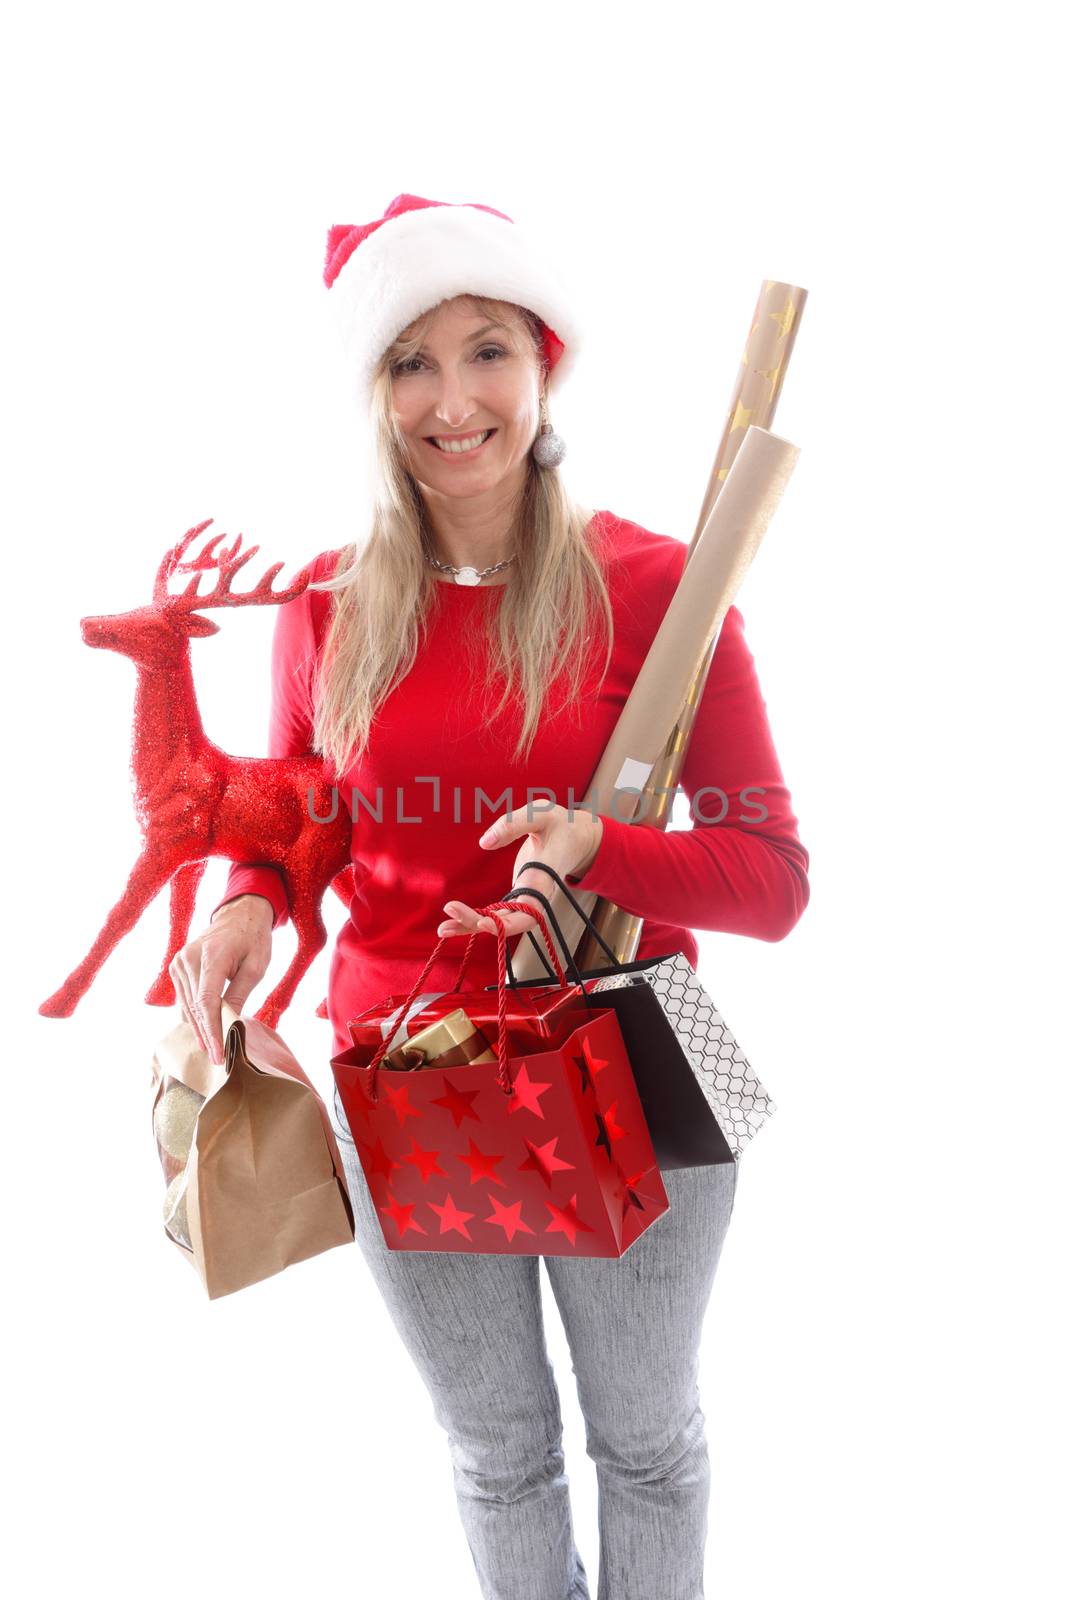 A woman carrying various gifts and decorations for Christmas by lovleah